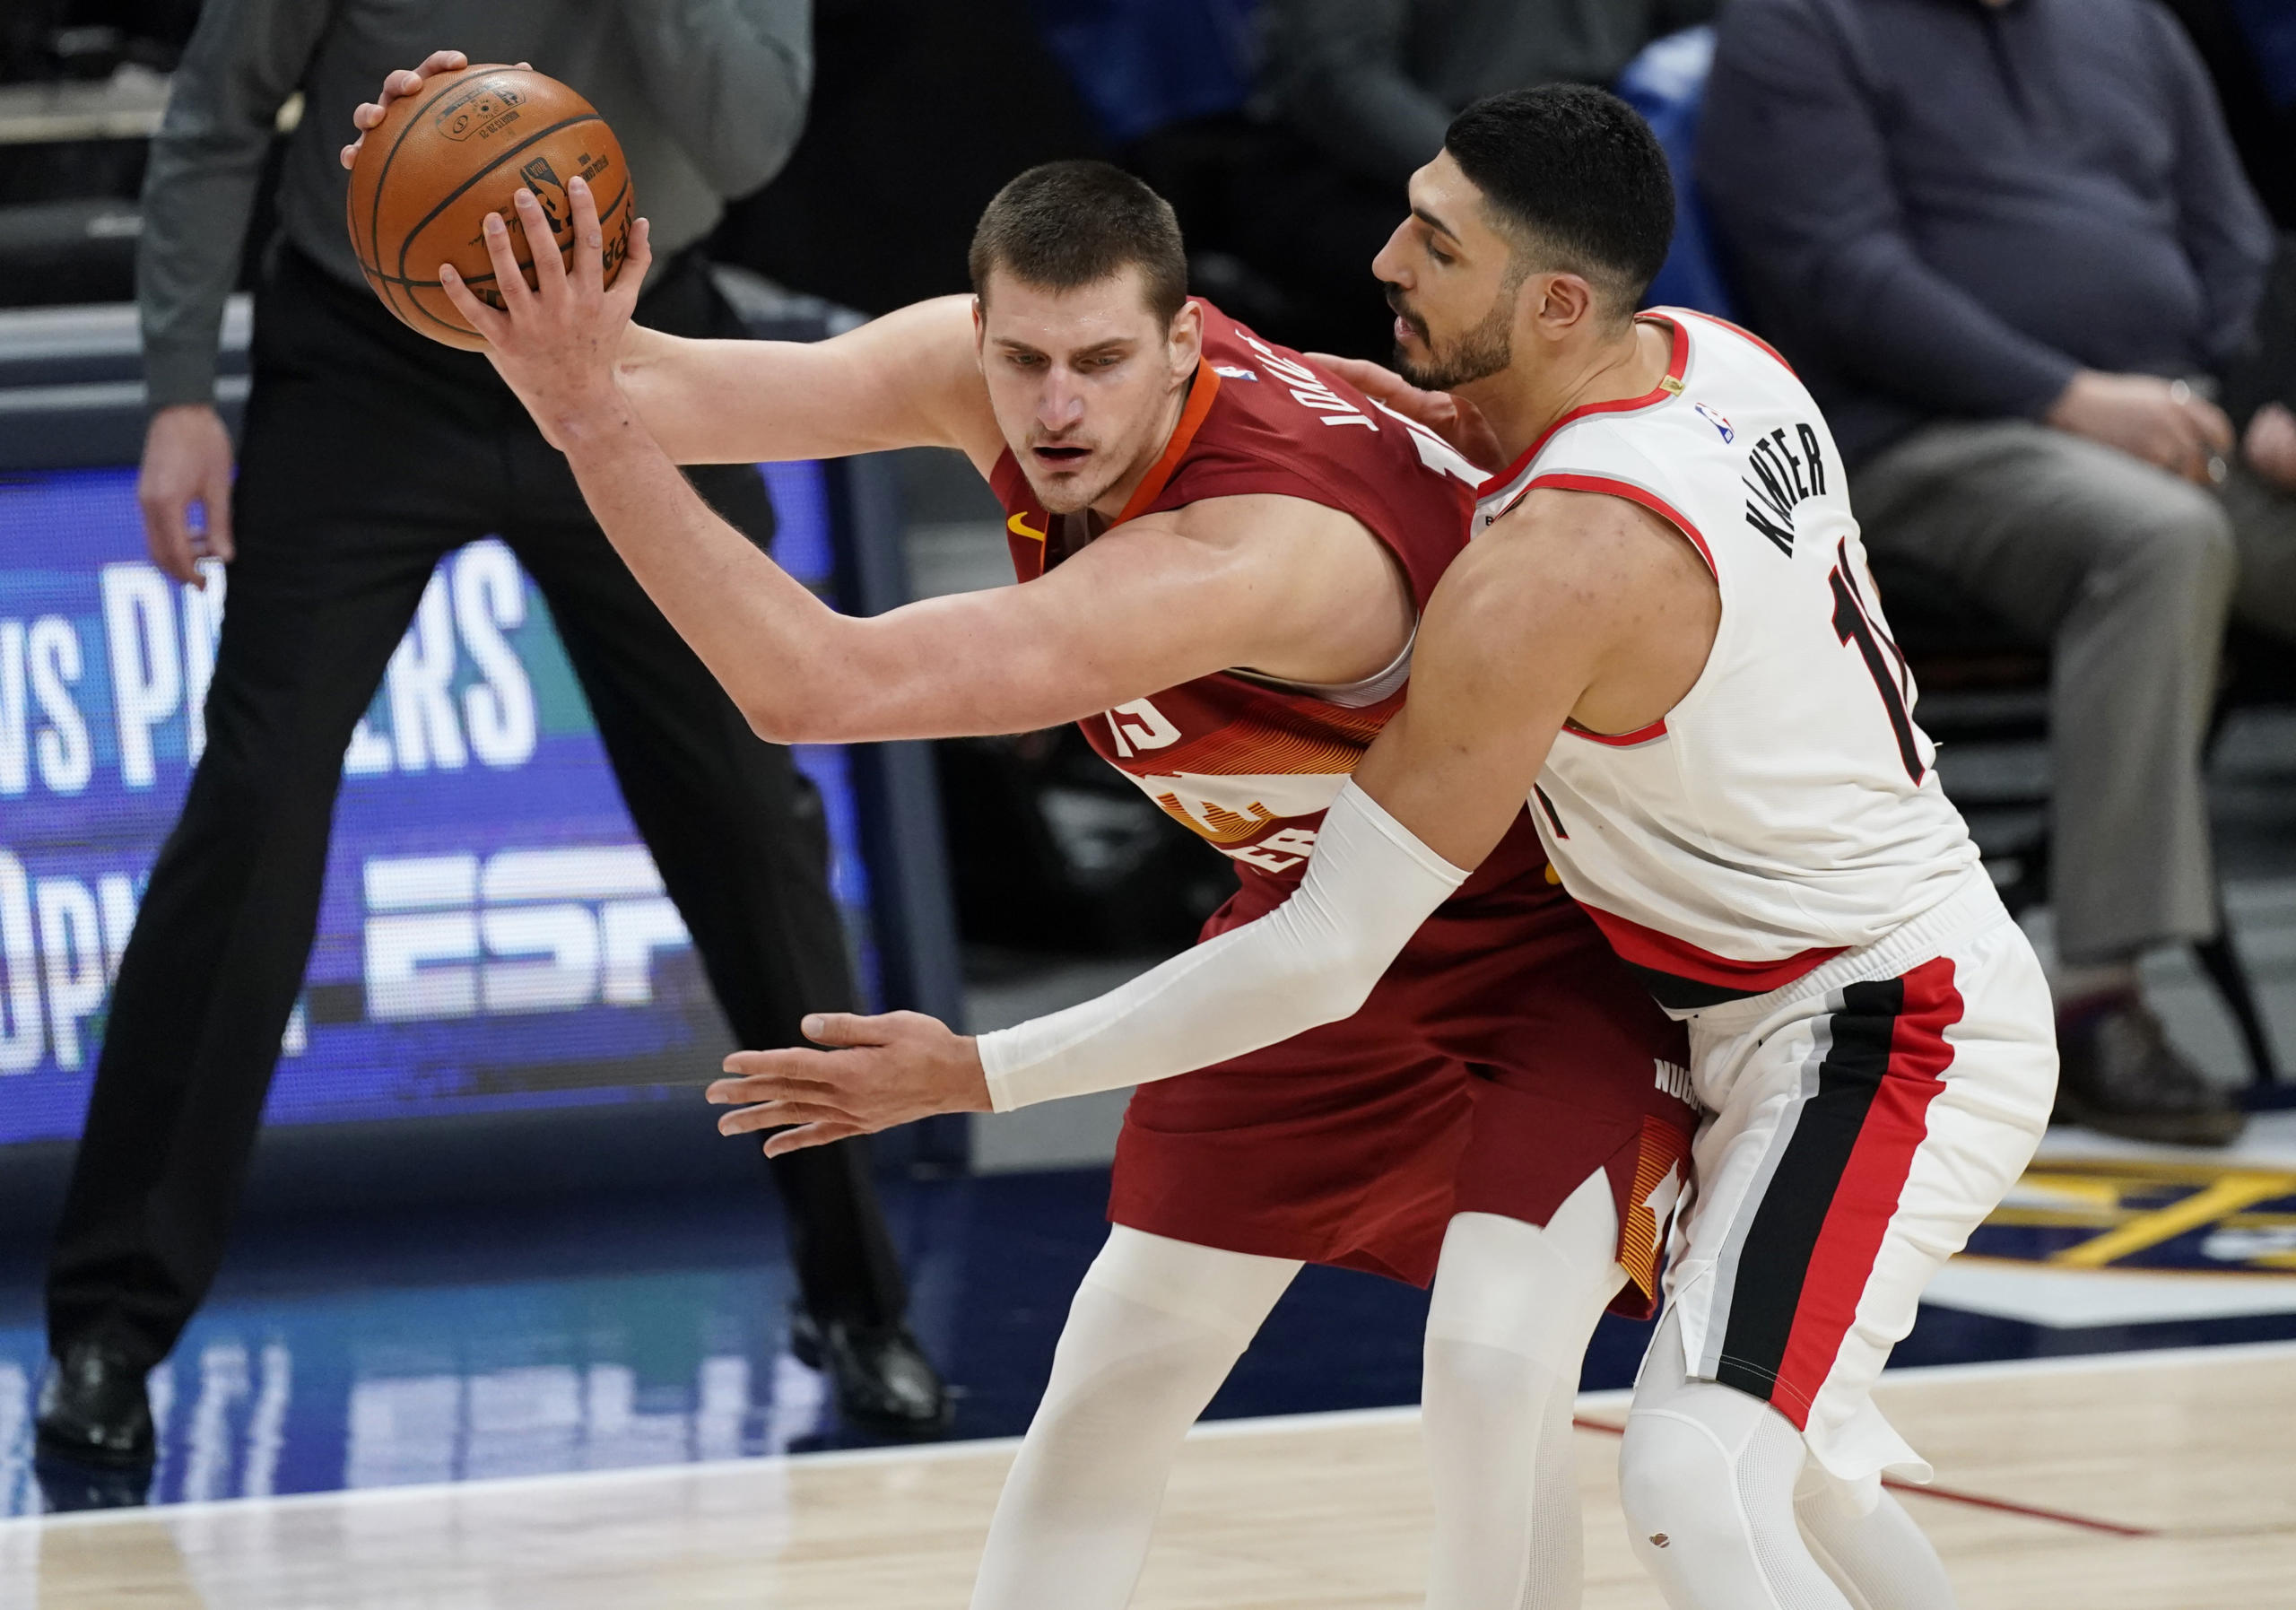 Denver Nuggets center Nikola Jokic, left, is defended by Portland Trail Blazers center Enes Kanter during the second half of an NBA basketball game on Tuesday, Feb. 23, 2021, in Denver.